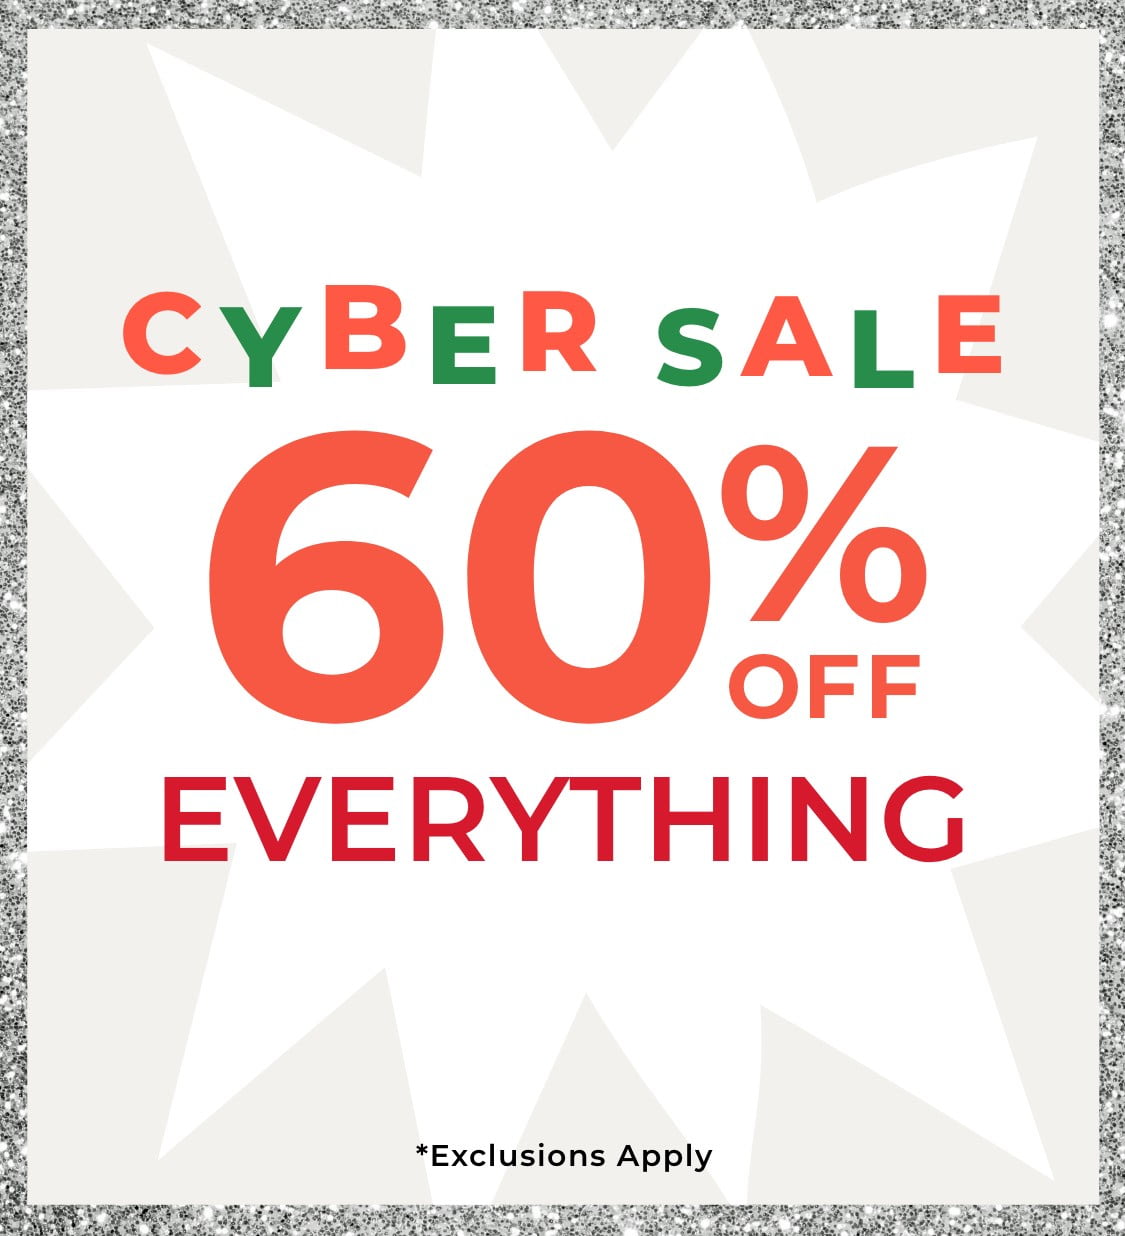 Cyber Monday | 60% off Entire Site